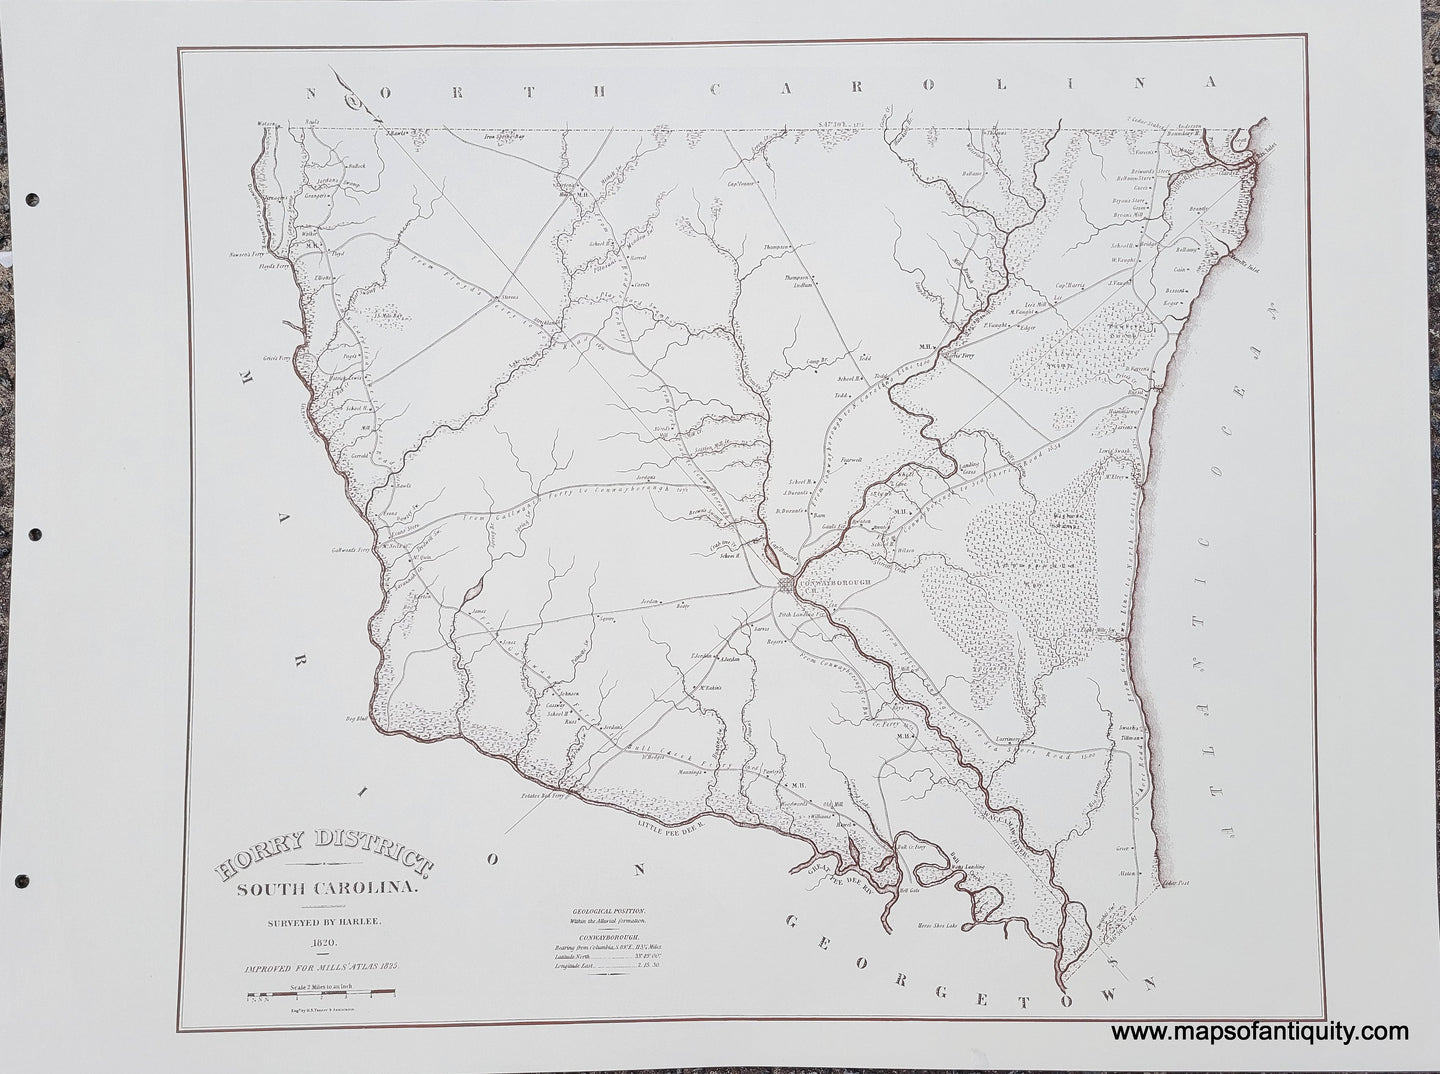 Reproduction-Horry District, South Carolina-1825 / 1979--Maps-Of-Antiquity